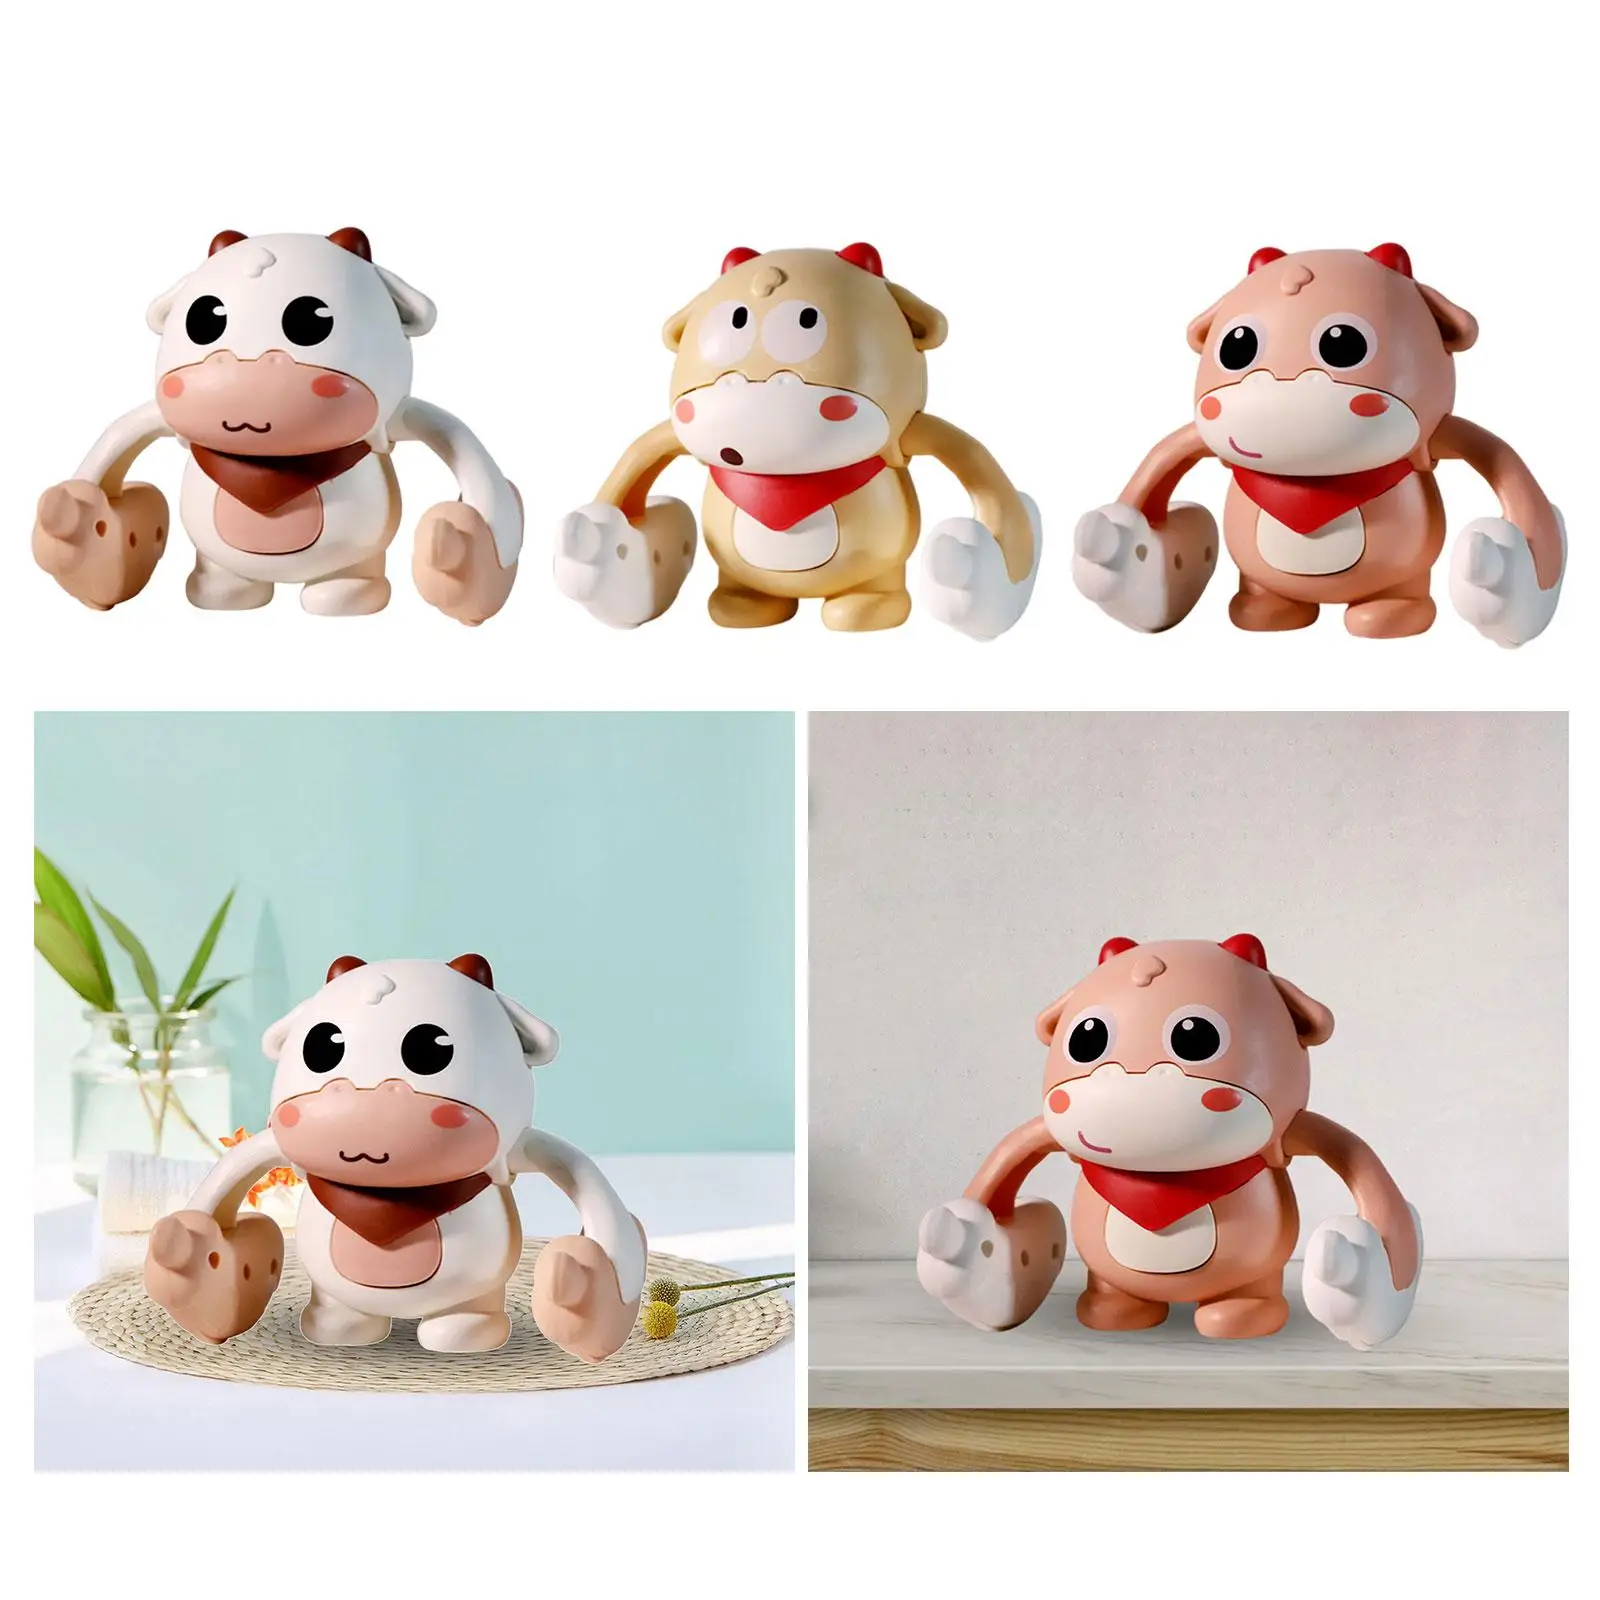 Roll over Cow Toy Gifts Tumbling Electric Toy for 6 to 12 Months Baby Kids